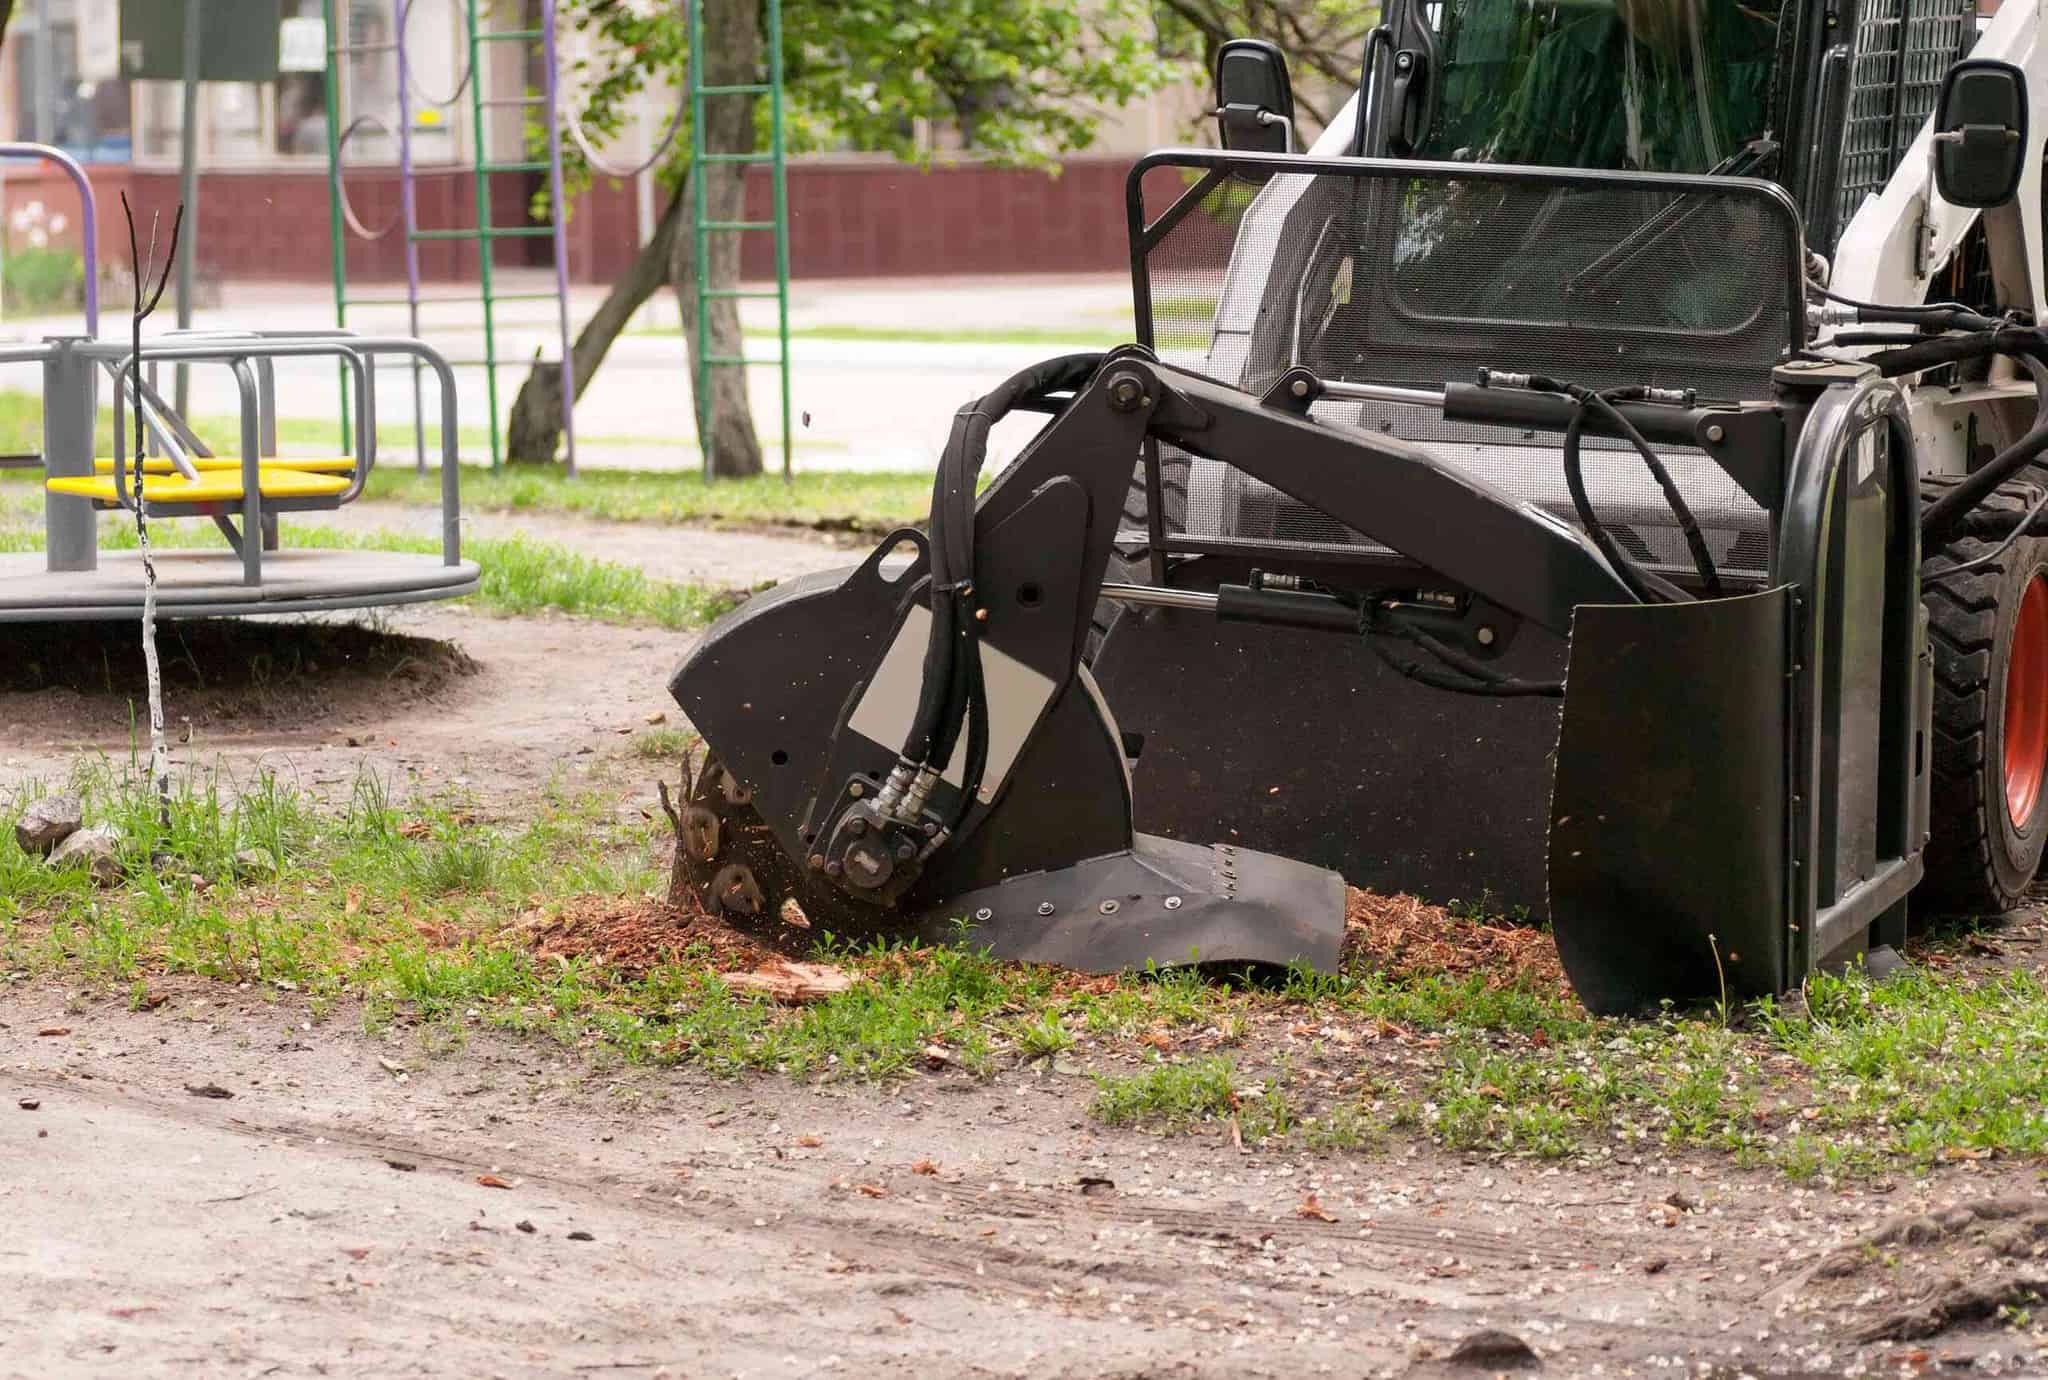 stump grinder being used at a park.